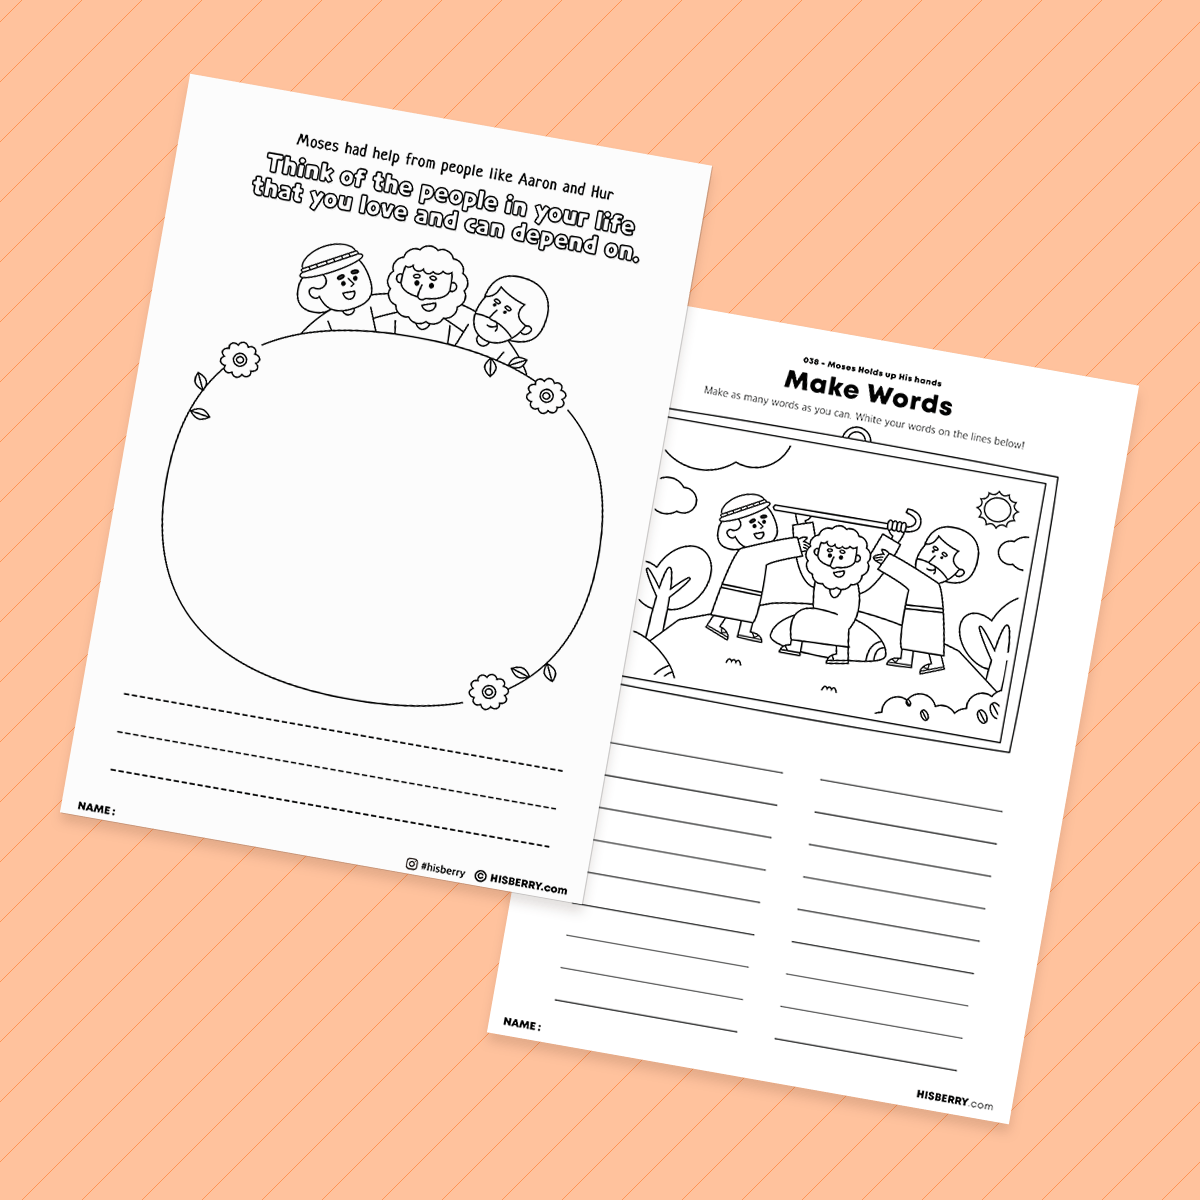 Moses Holds up His hands - Bible Verse Activity Worksheets